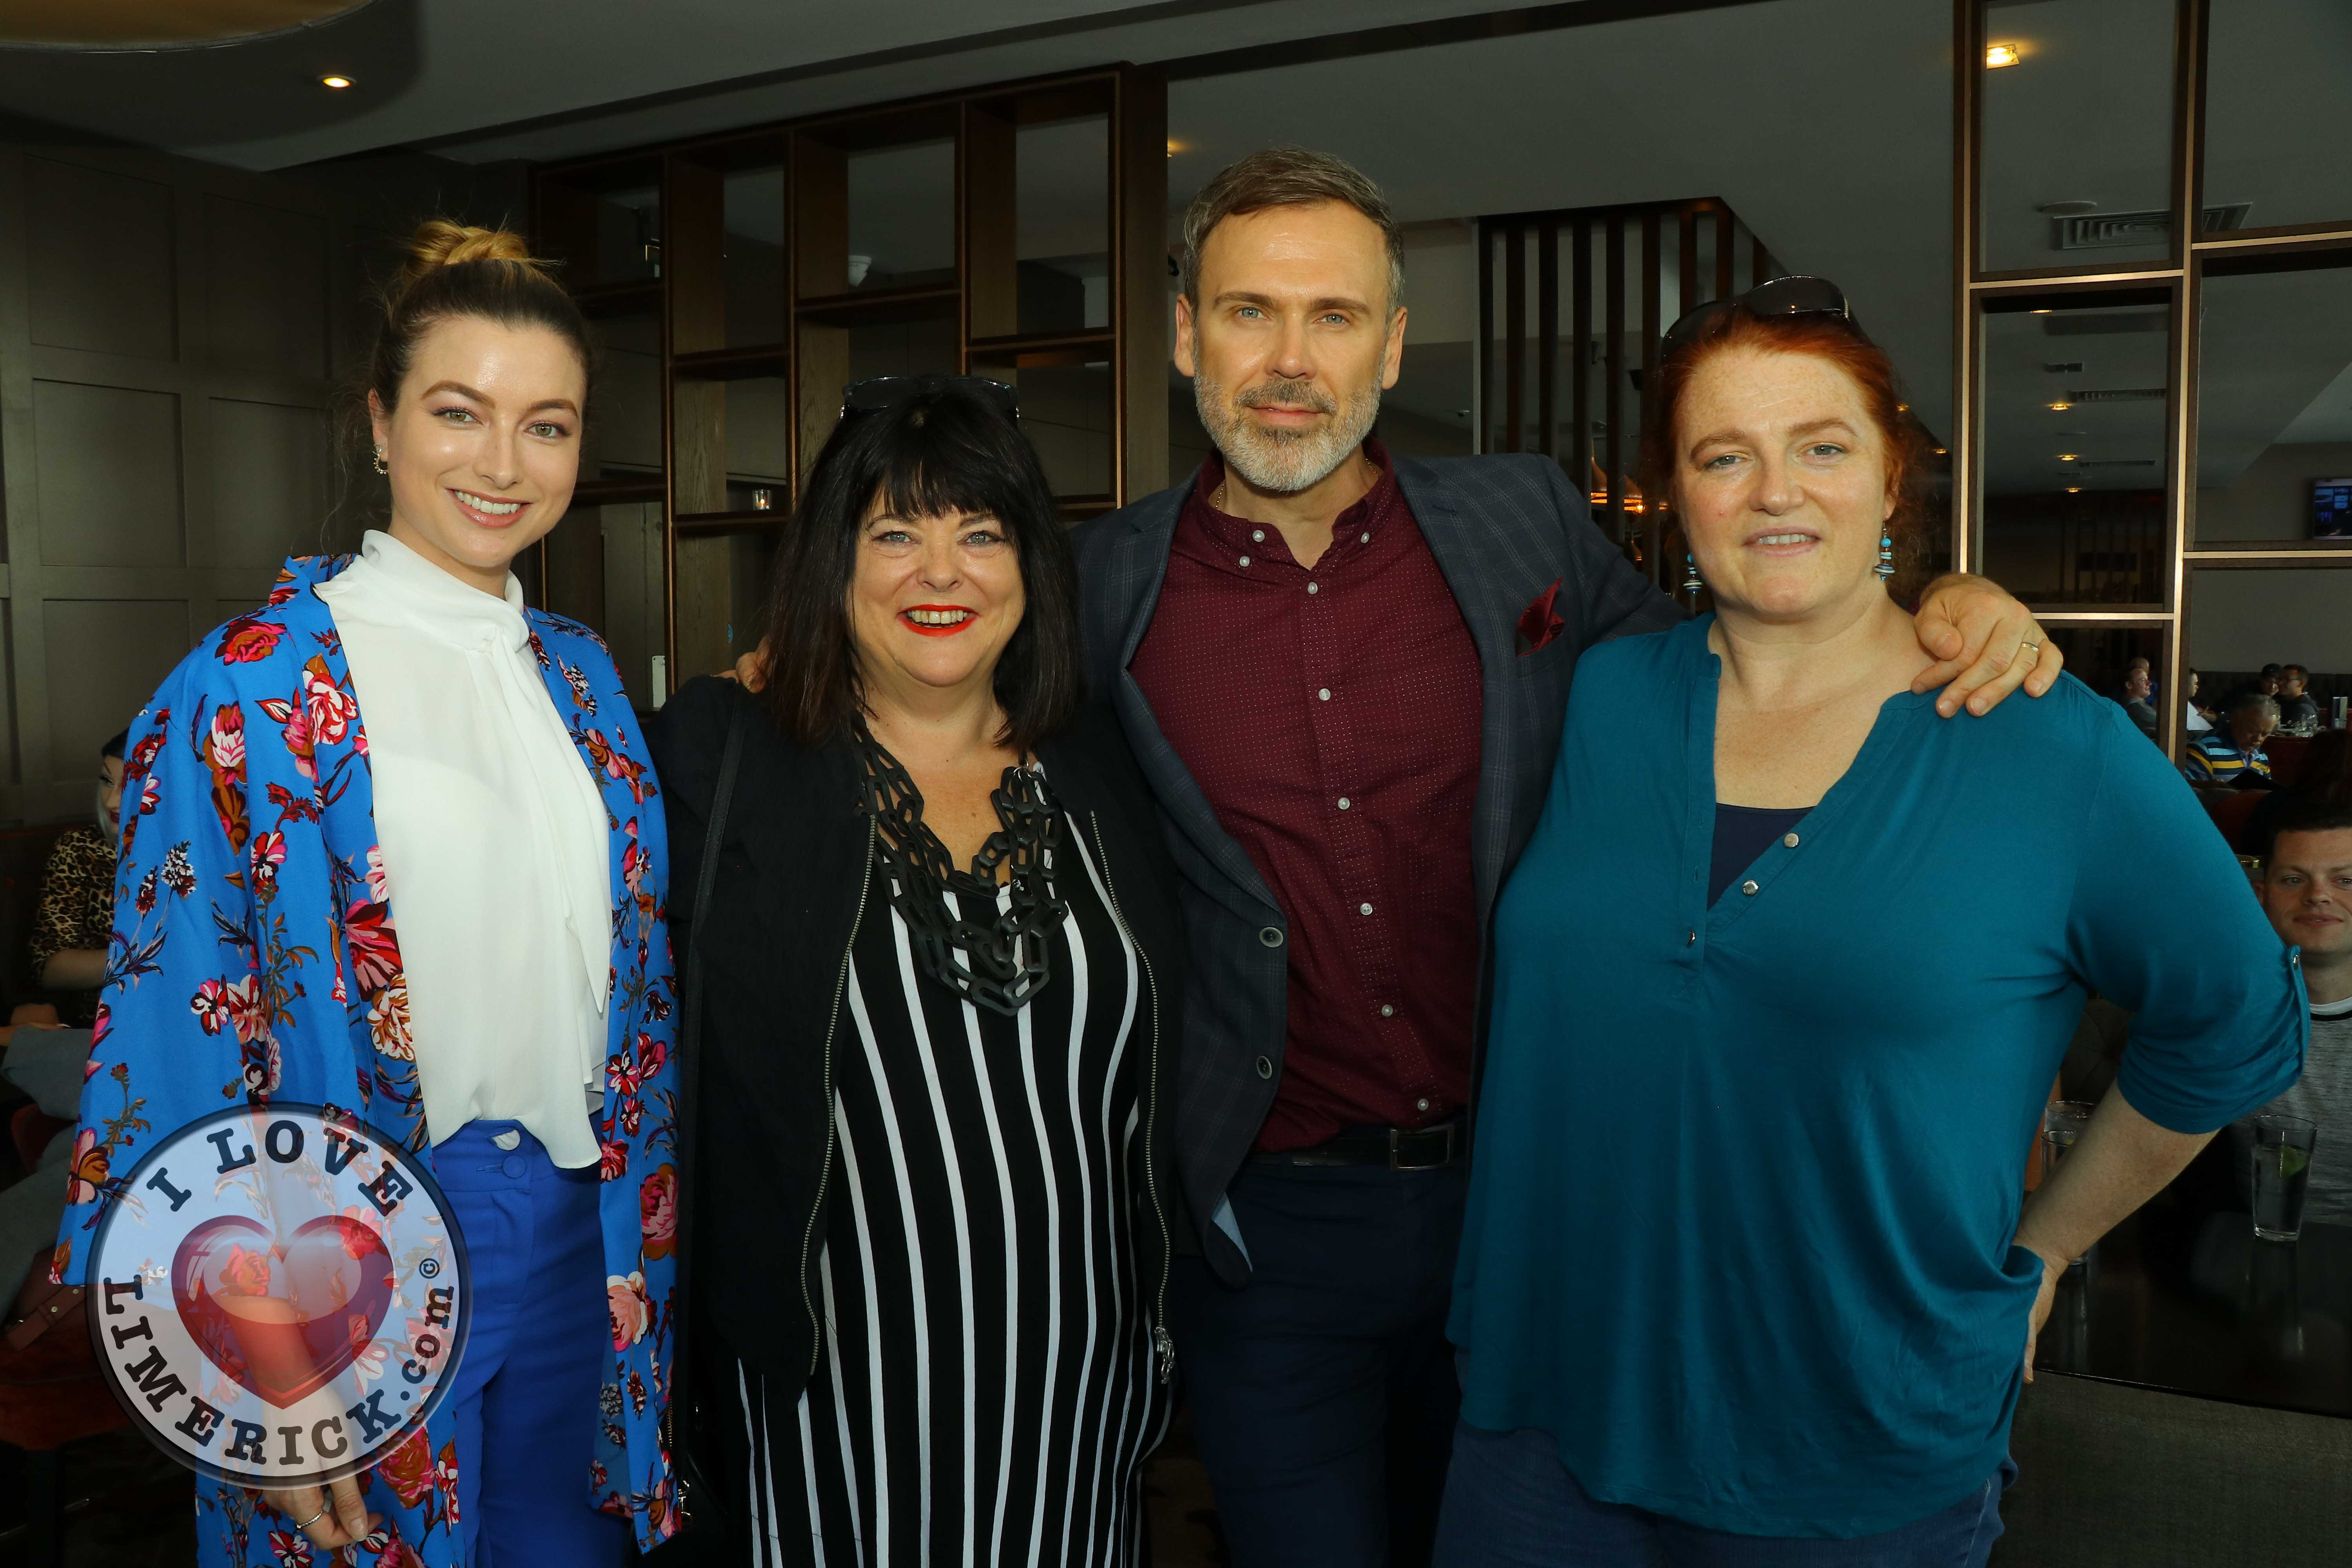 Pictured at the Limerick Pride 2019 Press Launch at the Clayton Hotel are Meghann Scully, Riverpoint, Valerie Dolan, Dock Road, Richard Lynch, I Love Limerick and Orla Clancy, Ballingarry. Picture: Conor Owens/ilovelimerick